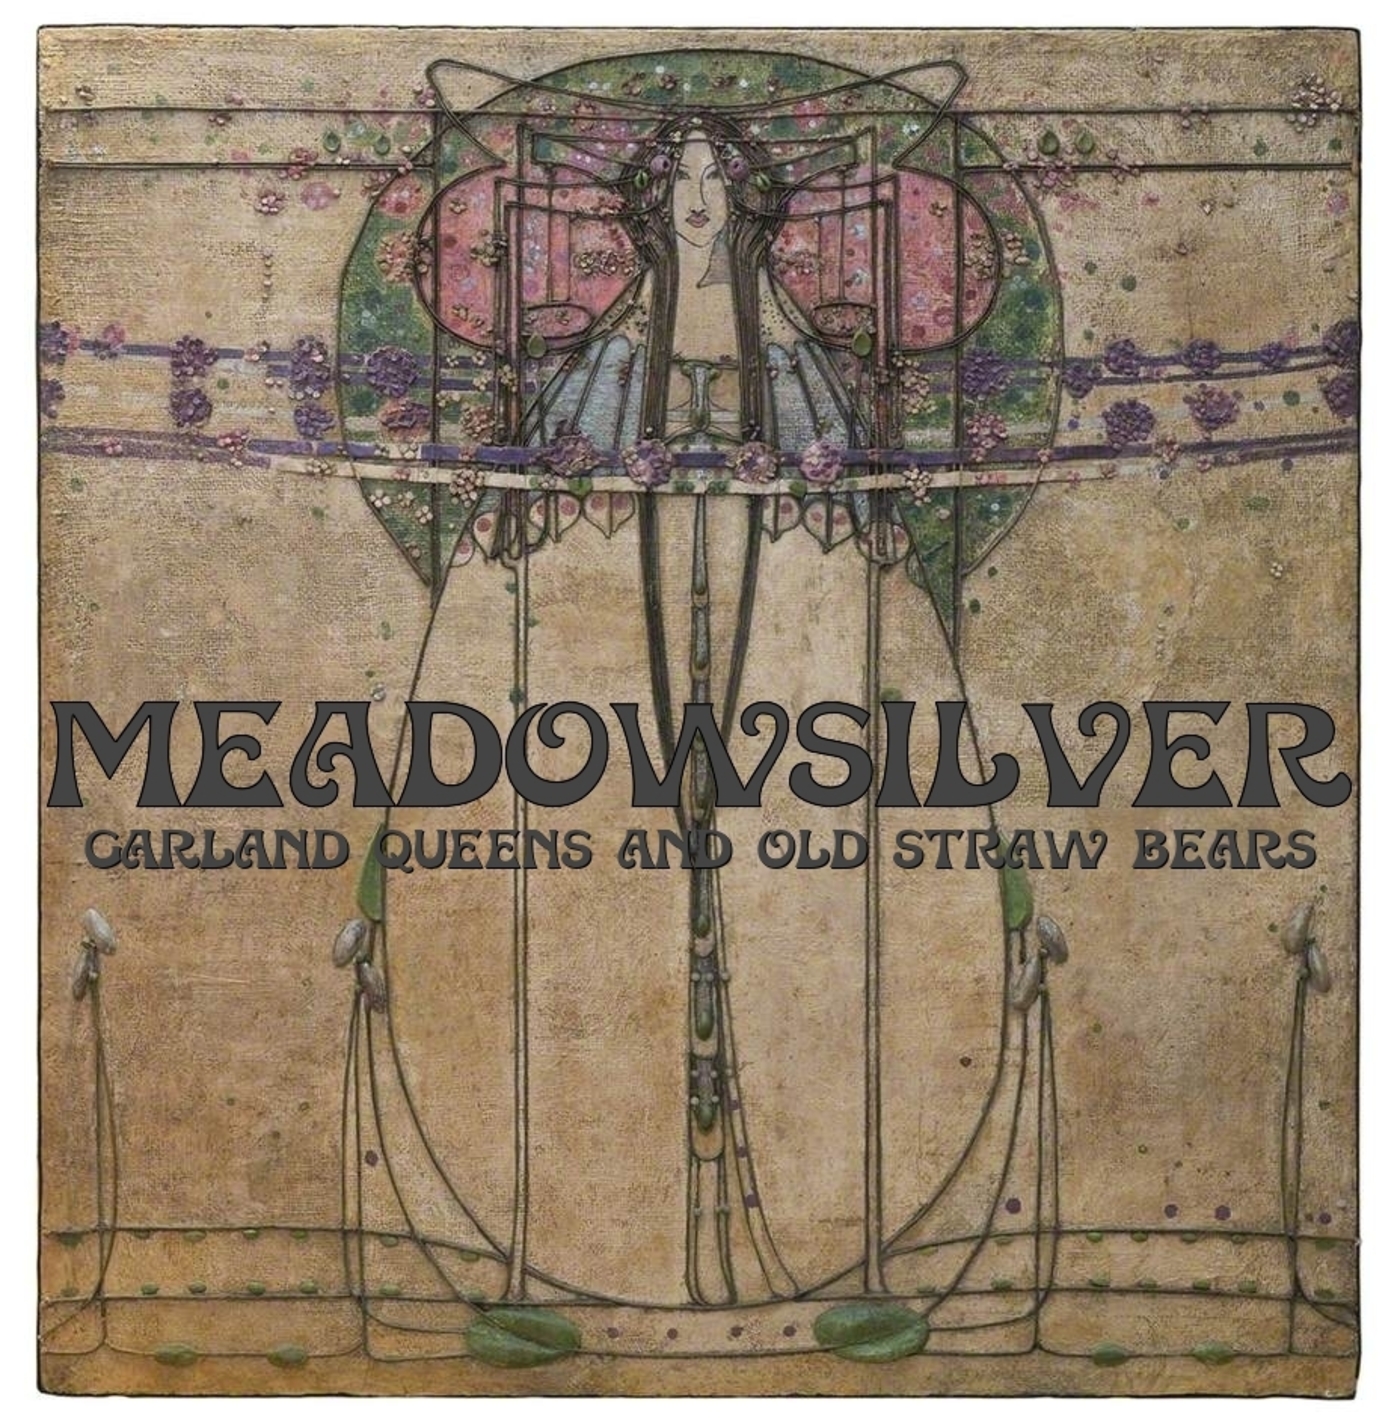 Garland Queens and Old Straw Bears single released